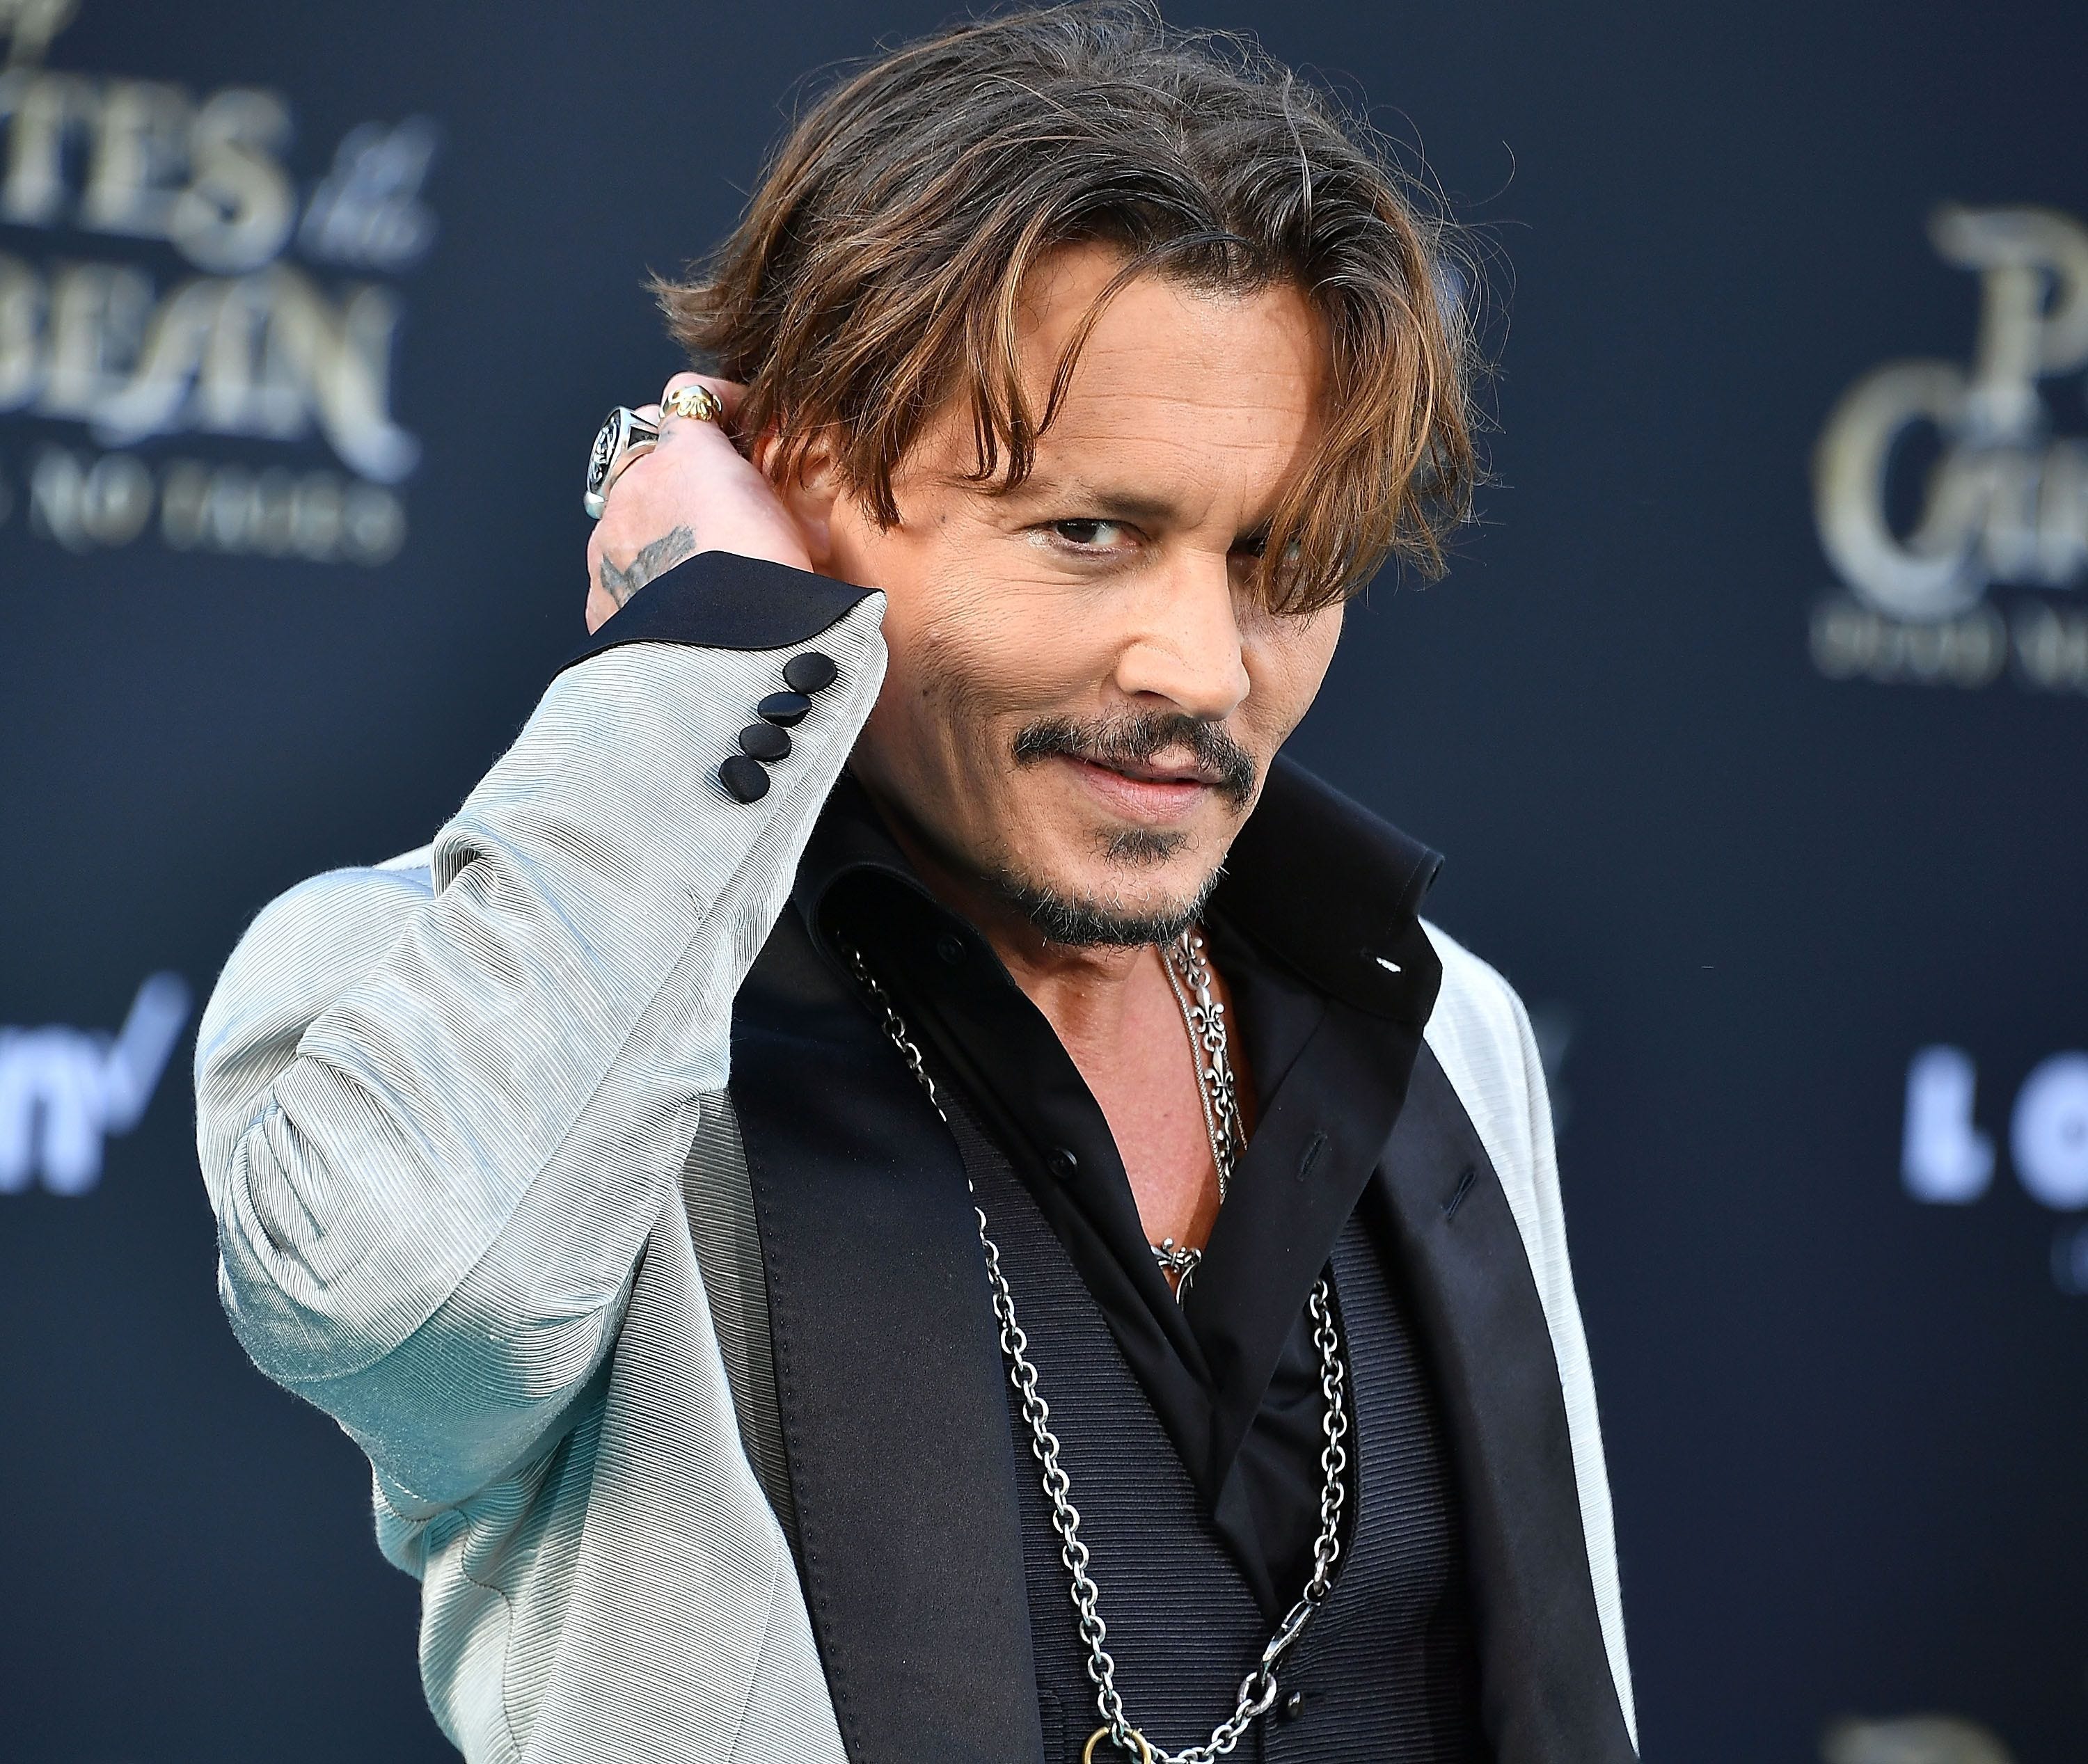 Johnny Depp apologizes for joke about assassinating Donald Trump